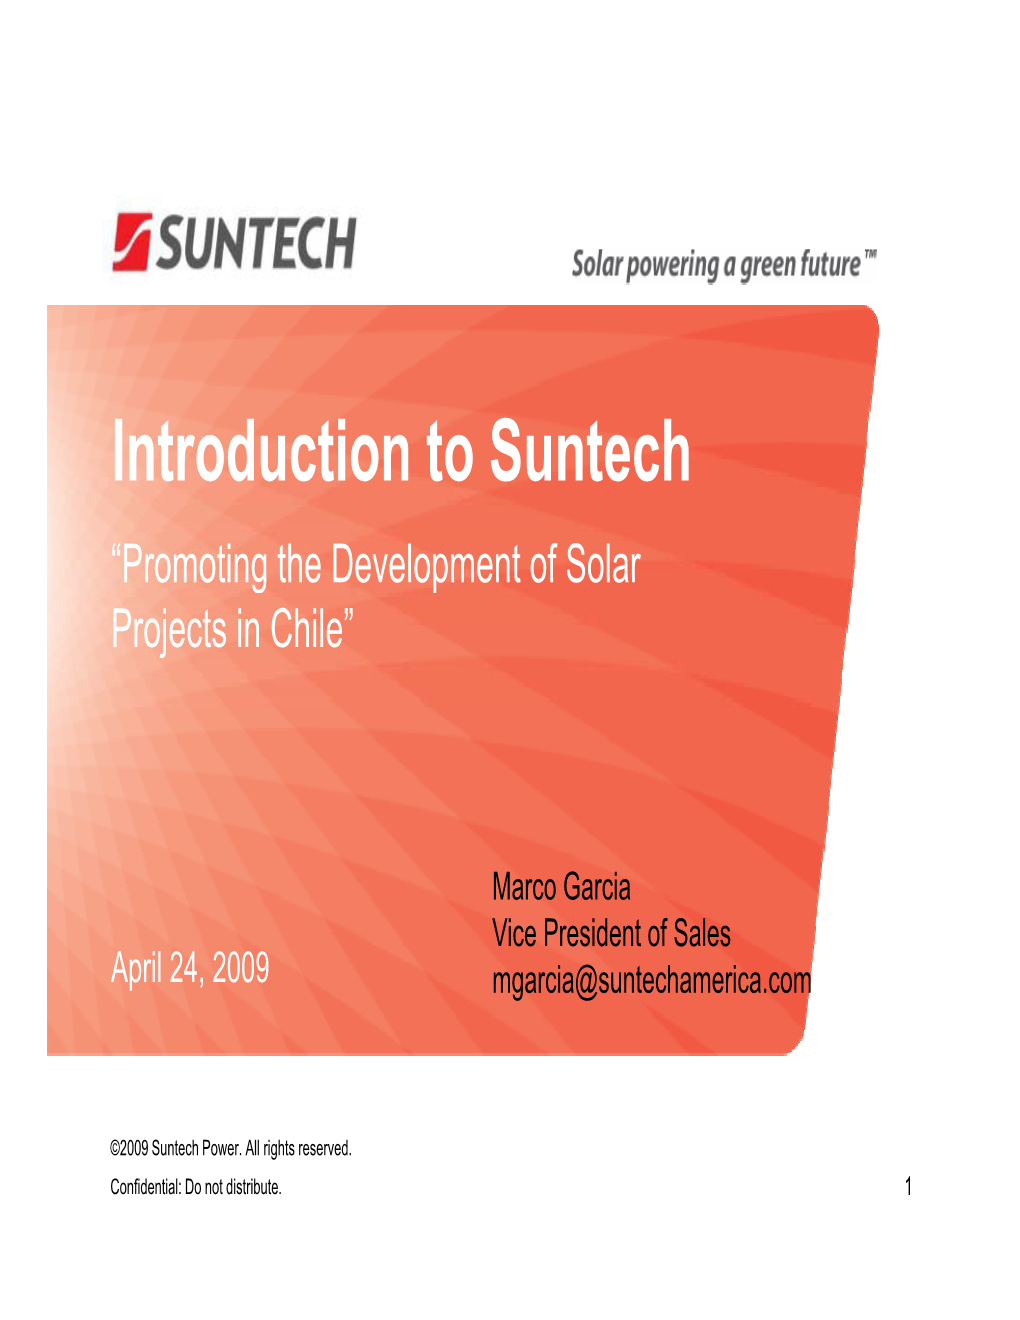 Introduction to Suntech “Promoting the Development of Solar Projects in Chile”